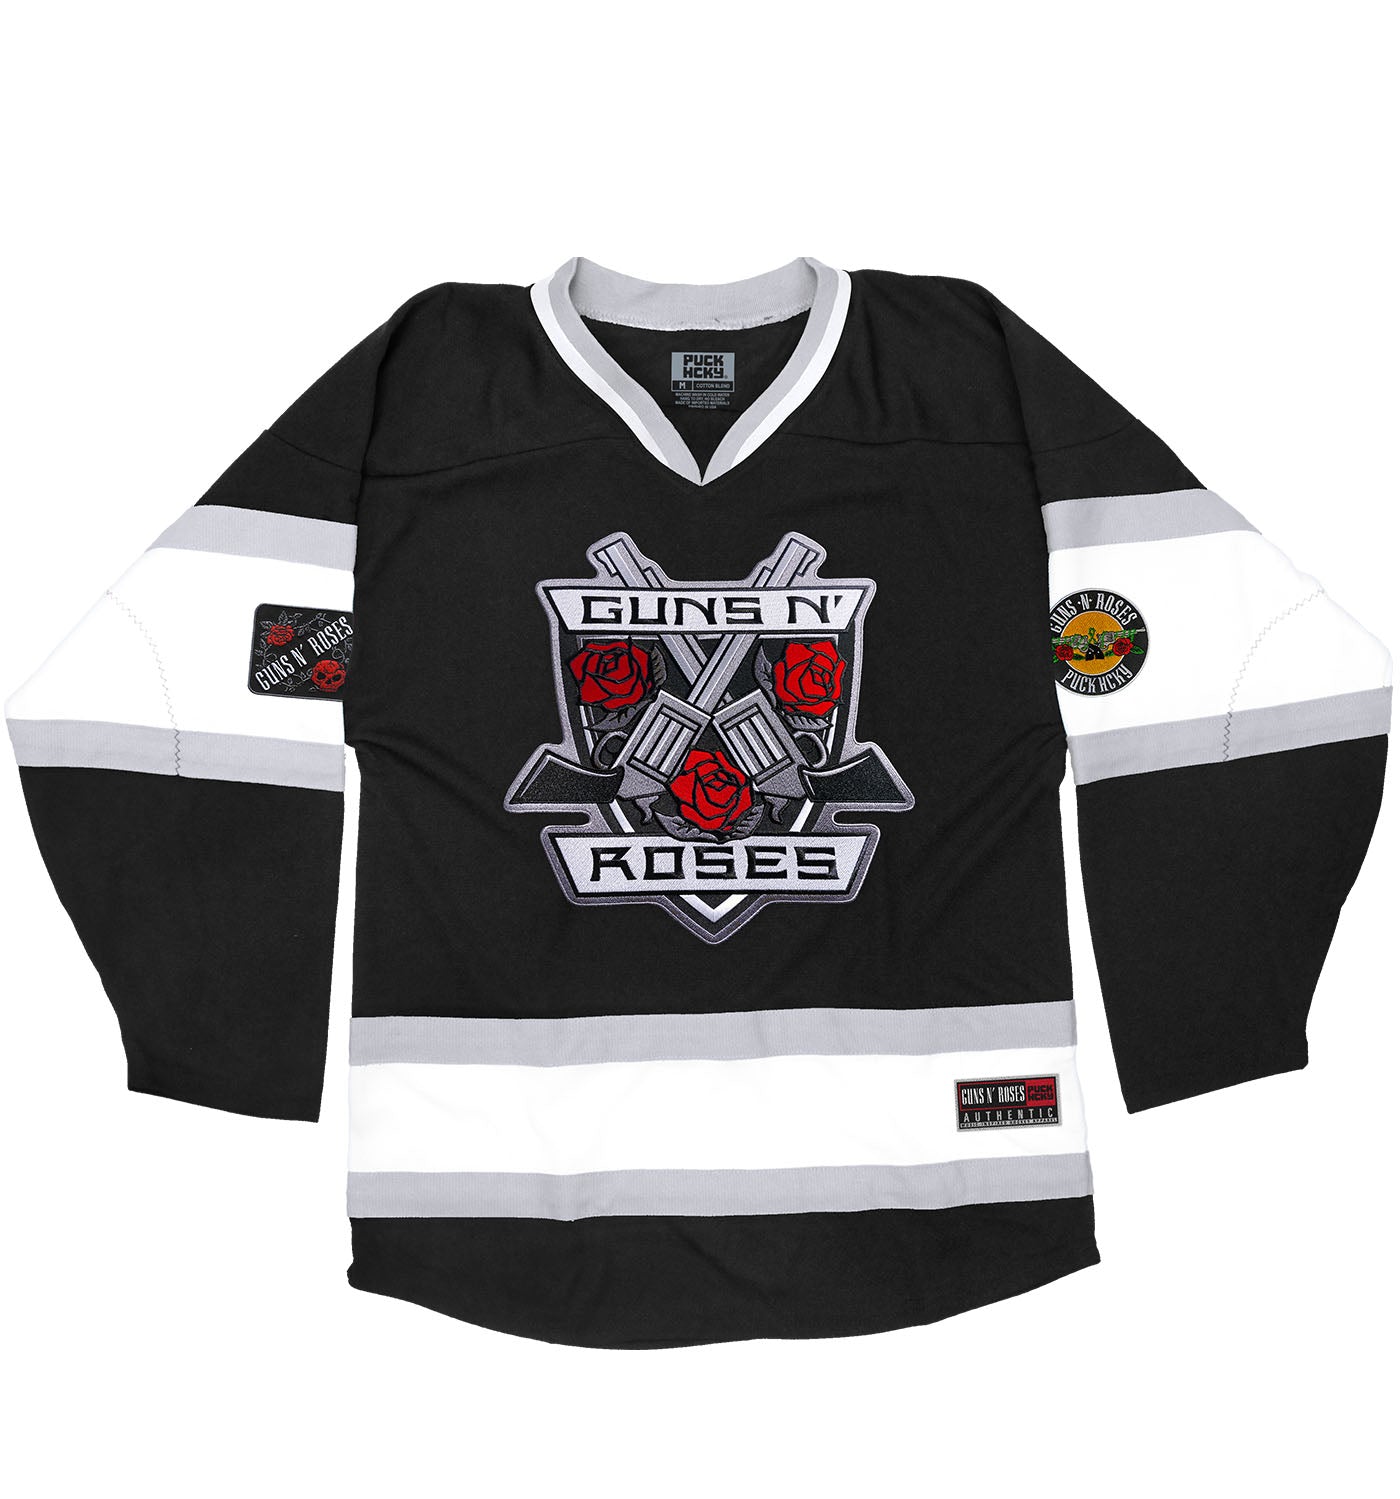 GUNS N' ROSES 'THE KINGS' deluxe hockey jersey in black, white, and grey front view